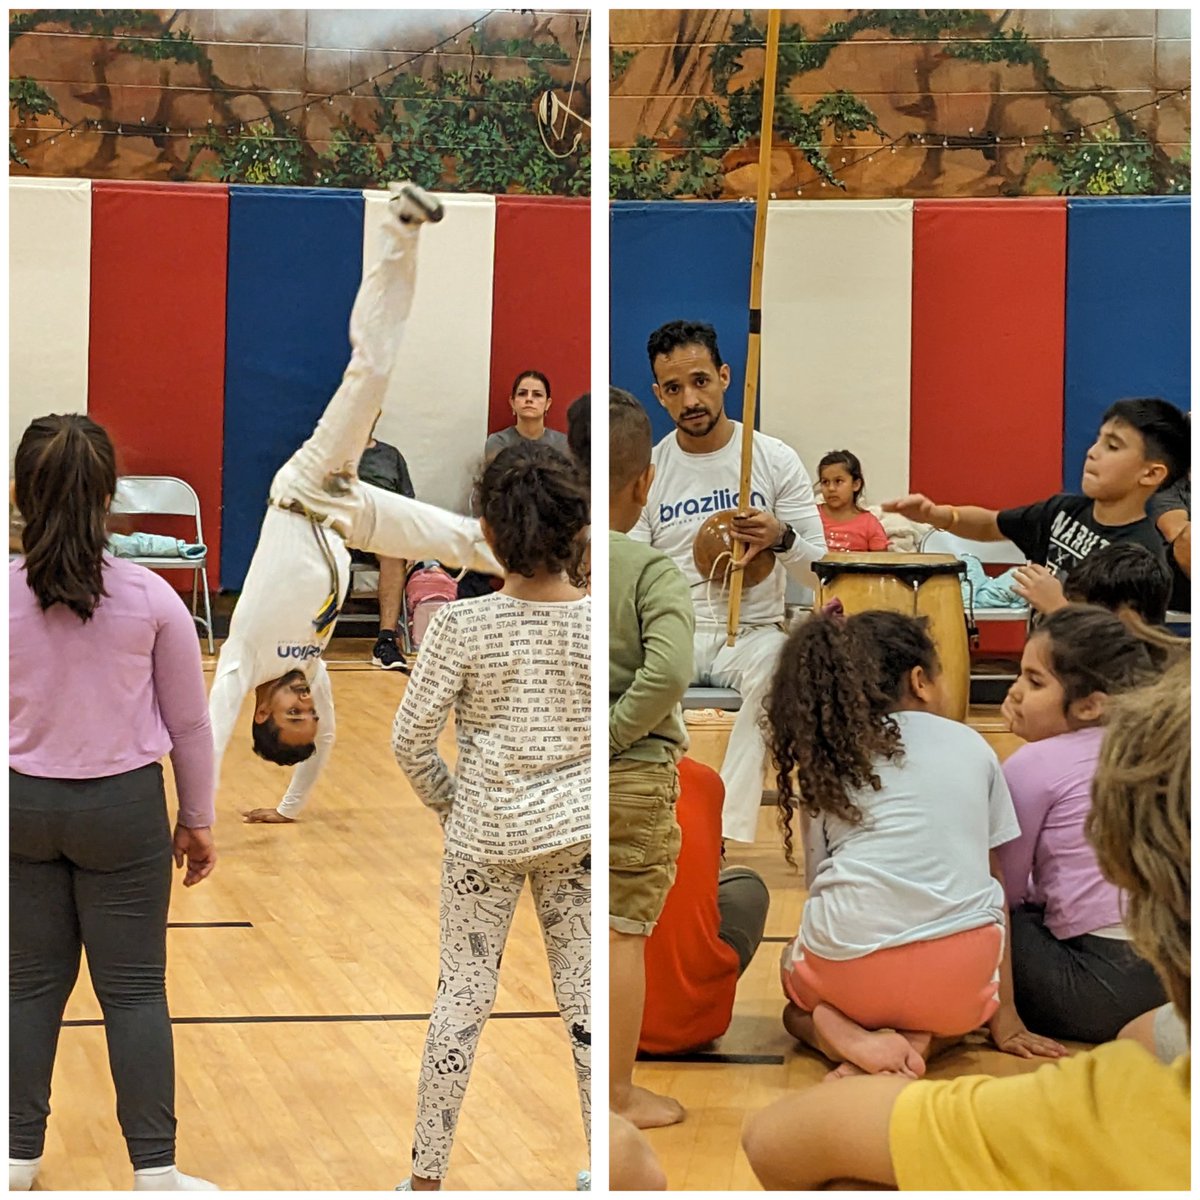 Que bom! A lively evening of Capoeira dance and music @SlateHillStars with @CLASatOSU... Thanks Sra. Zevallos, Vitoria Lima, Mrs. Gulley, and @wcsdistrict dancing families!